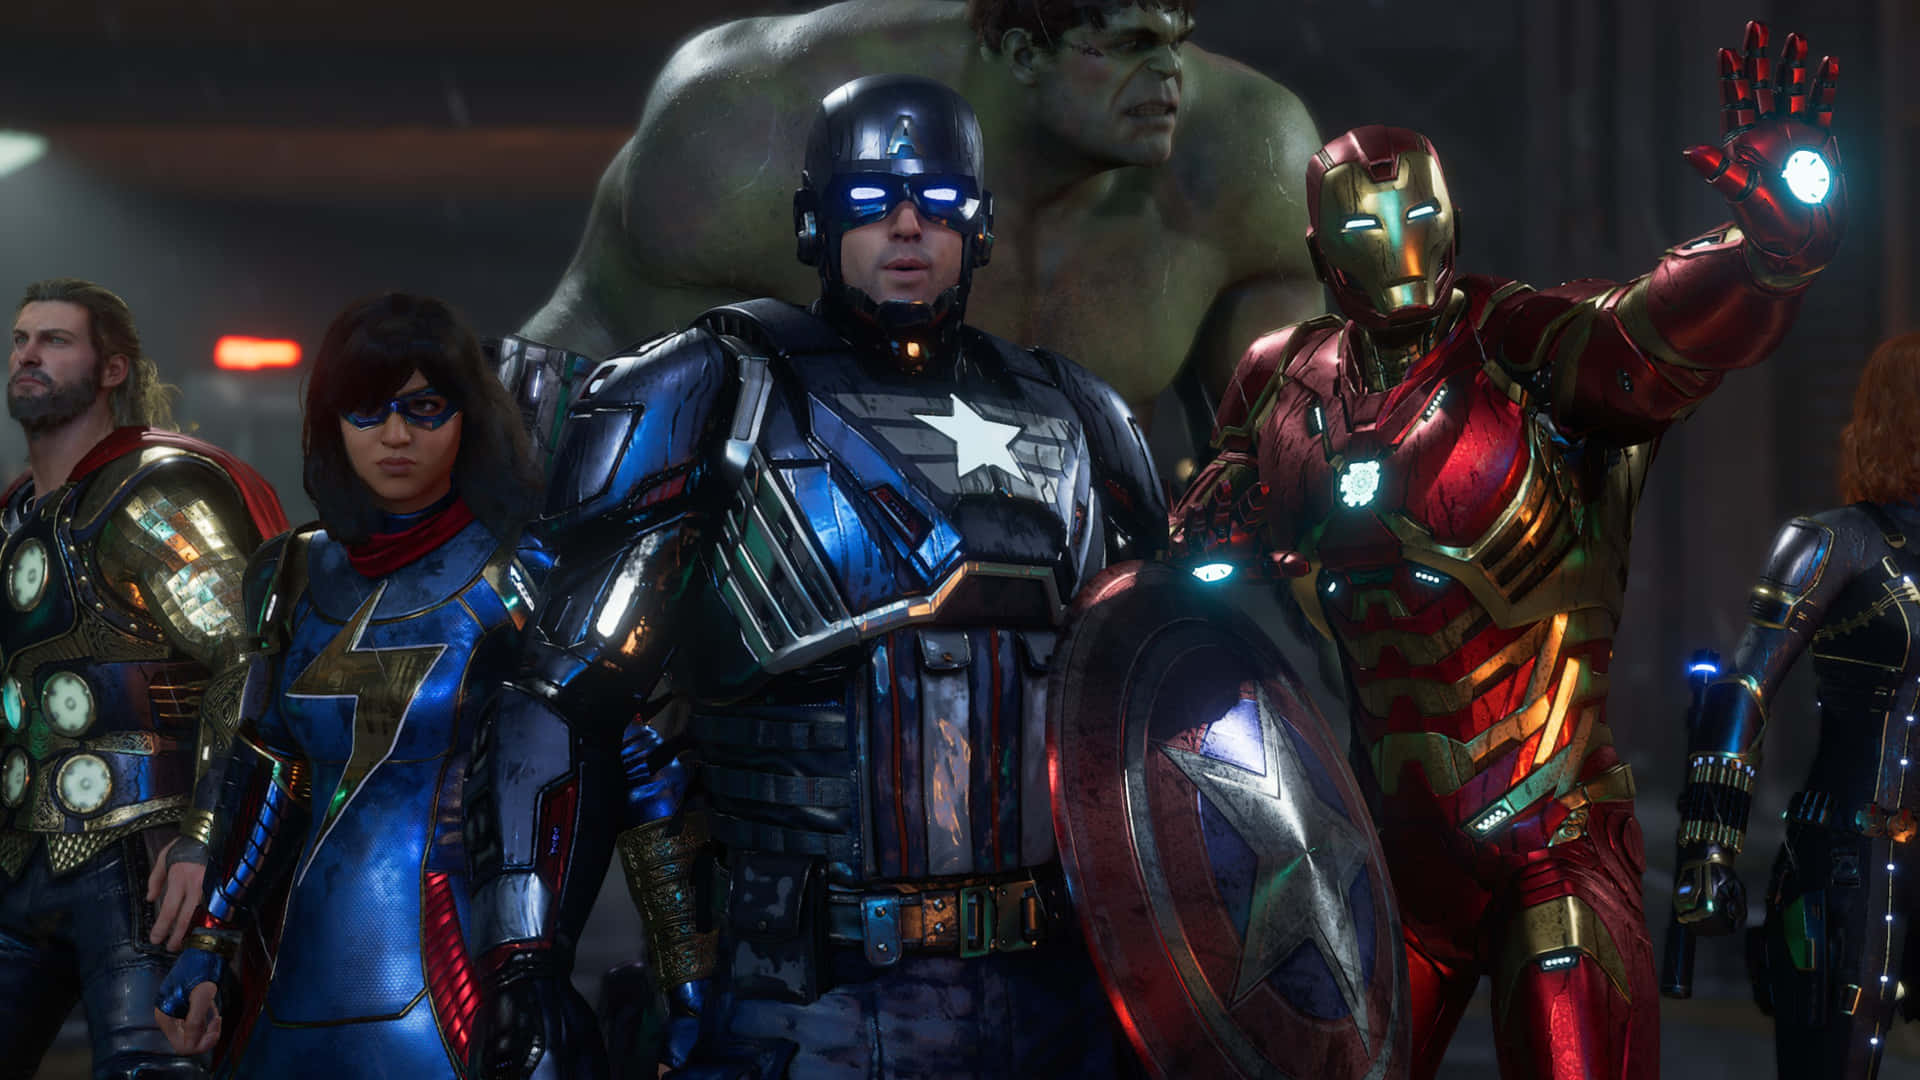 Unite to save the world: meet the Avengers!